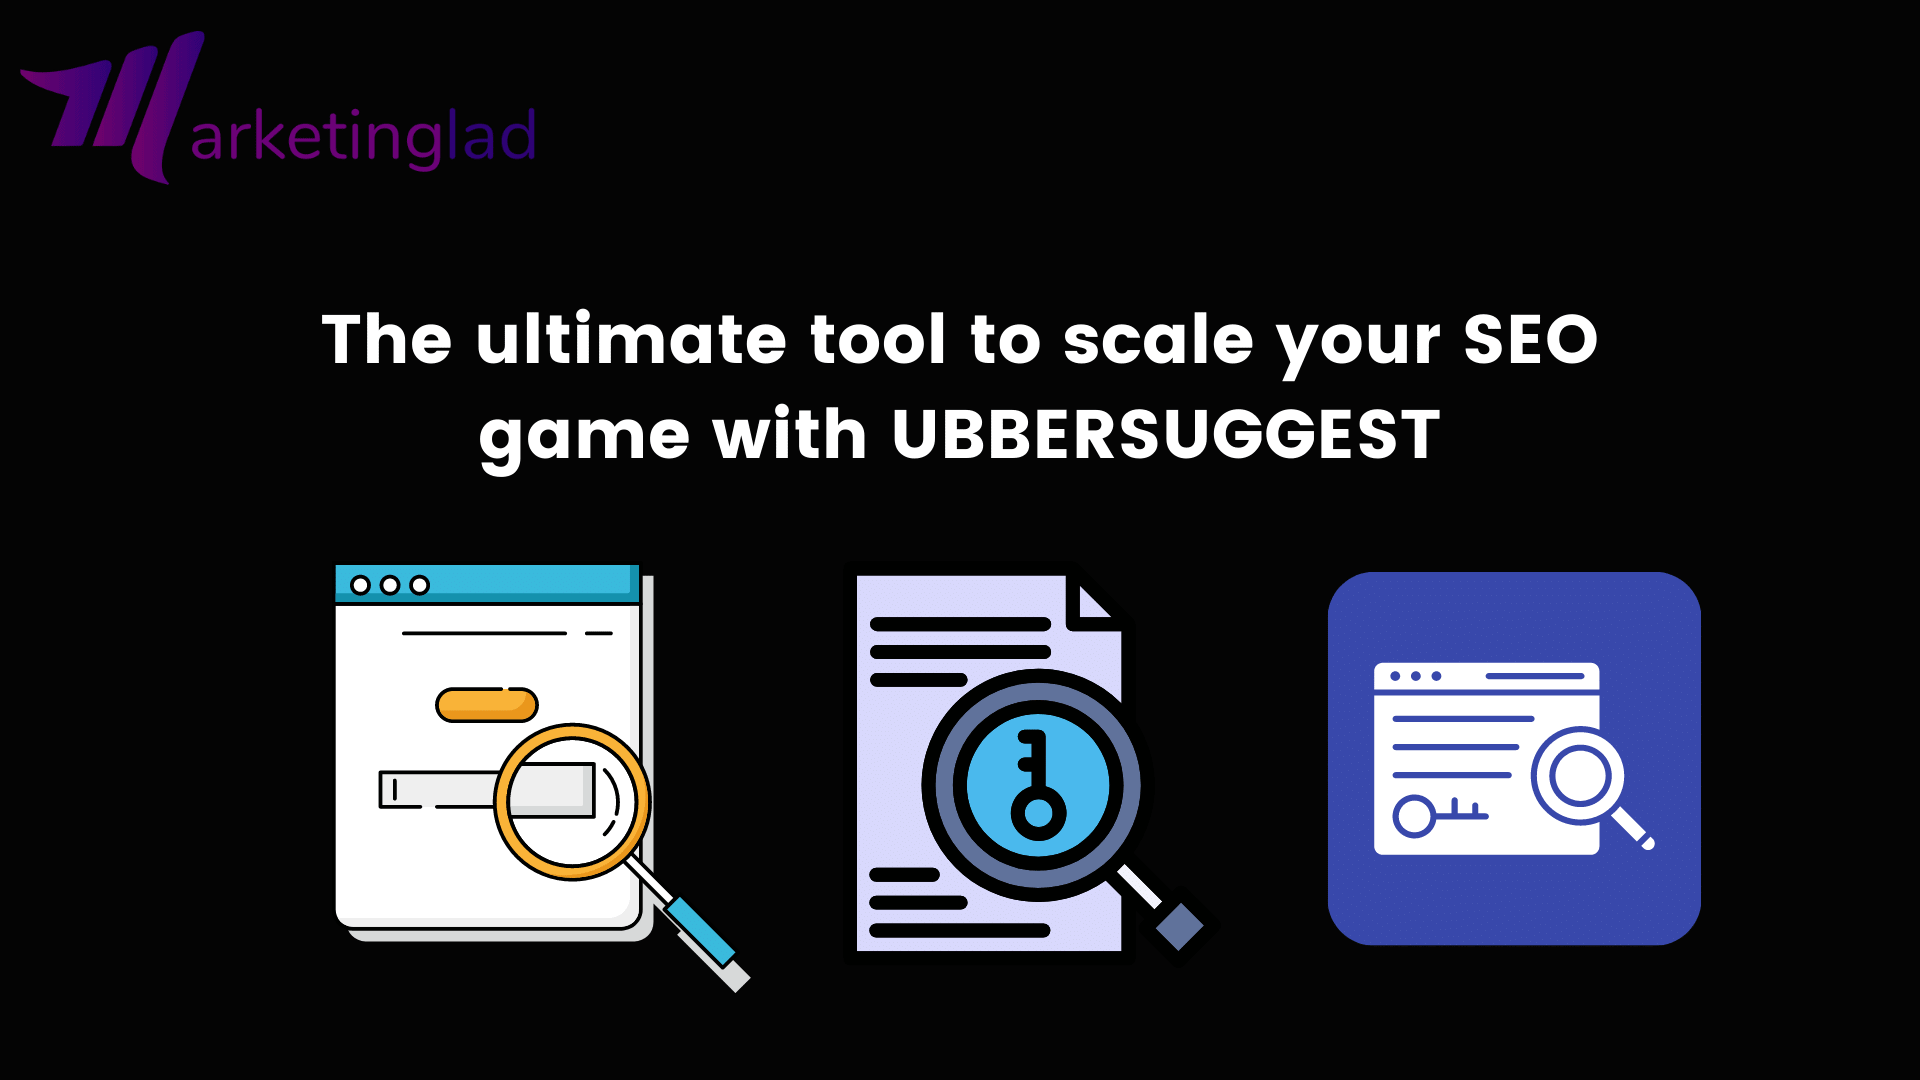 scale your SEO game with UBBERSUGGEST